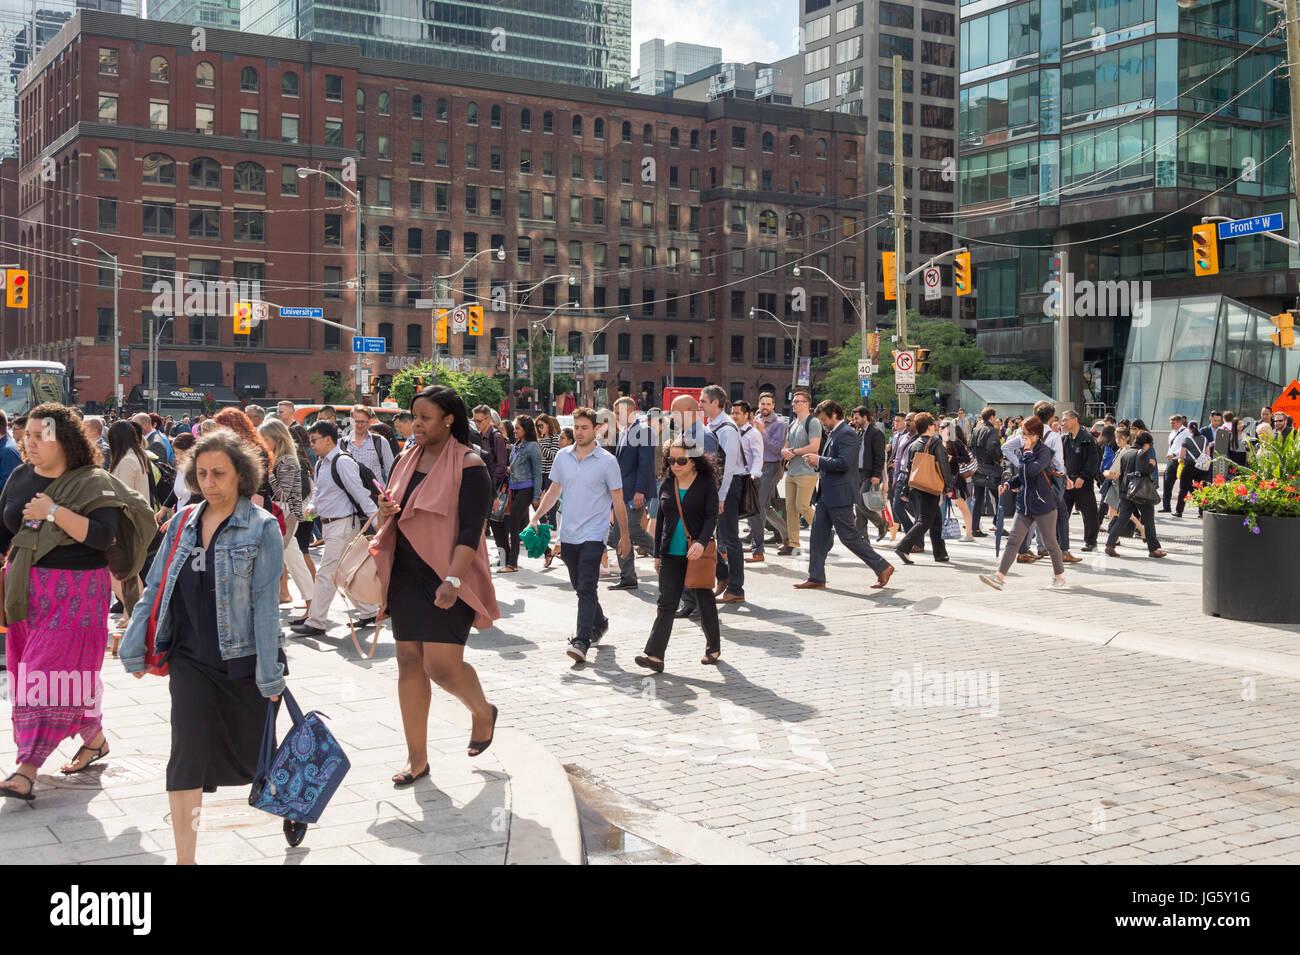 Toronto, Canada - 26 June 2017: A crowd of people crossing Front street in Downtown Toronto Stock Photo